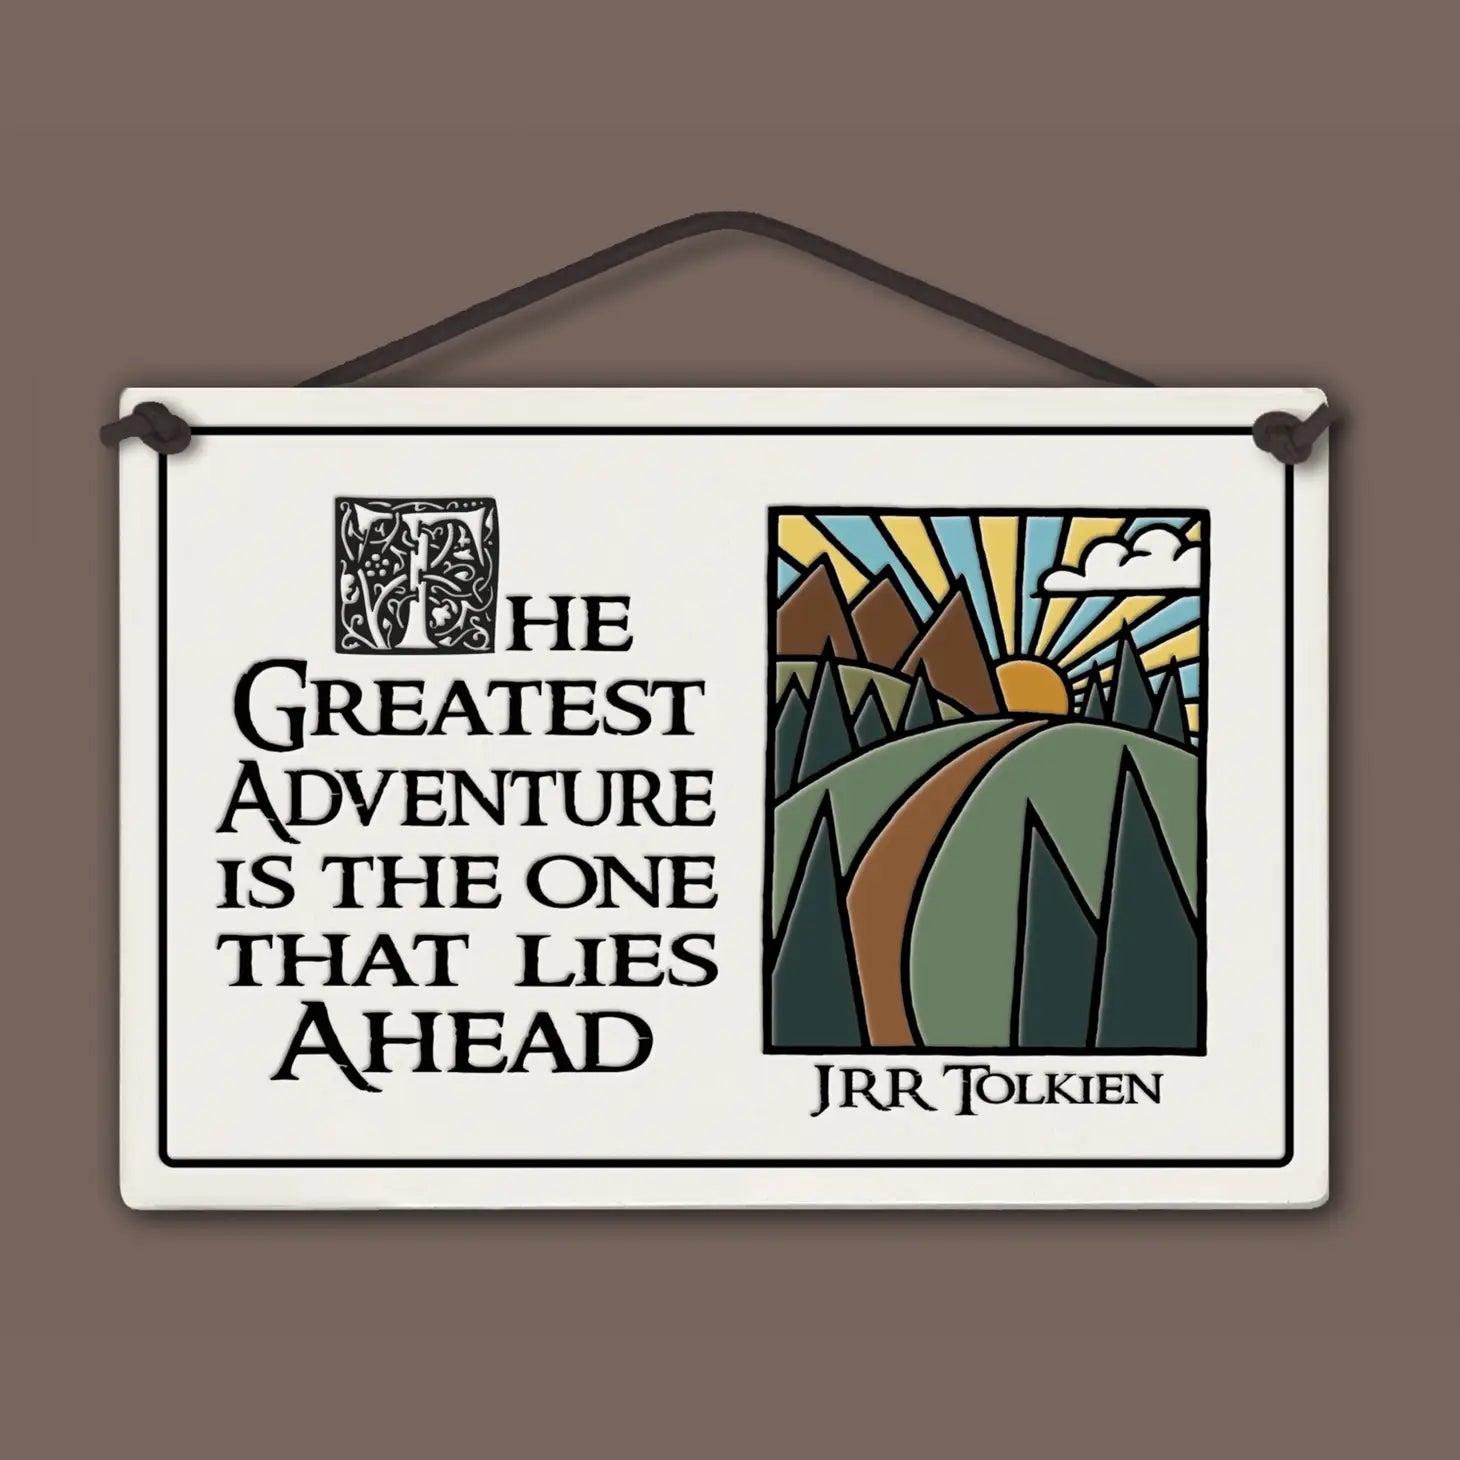 "The greatest adventure is the one that lies ahead. -JRR Tolkien" Stoneware Plaque